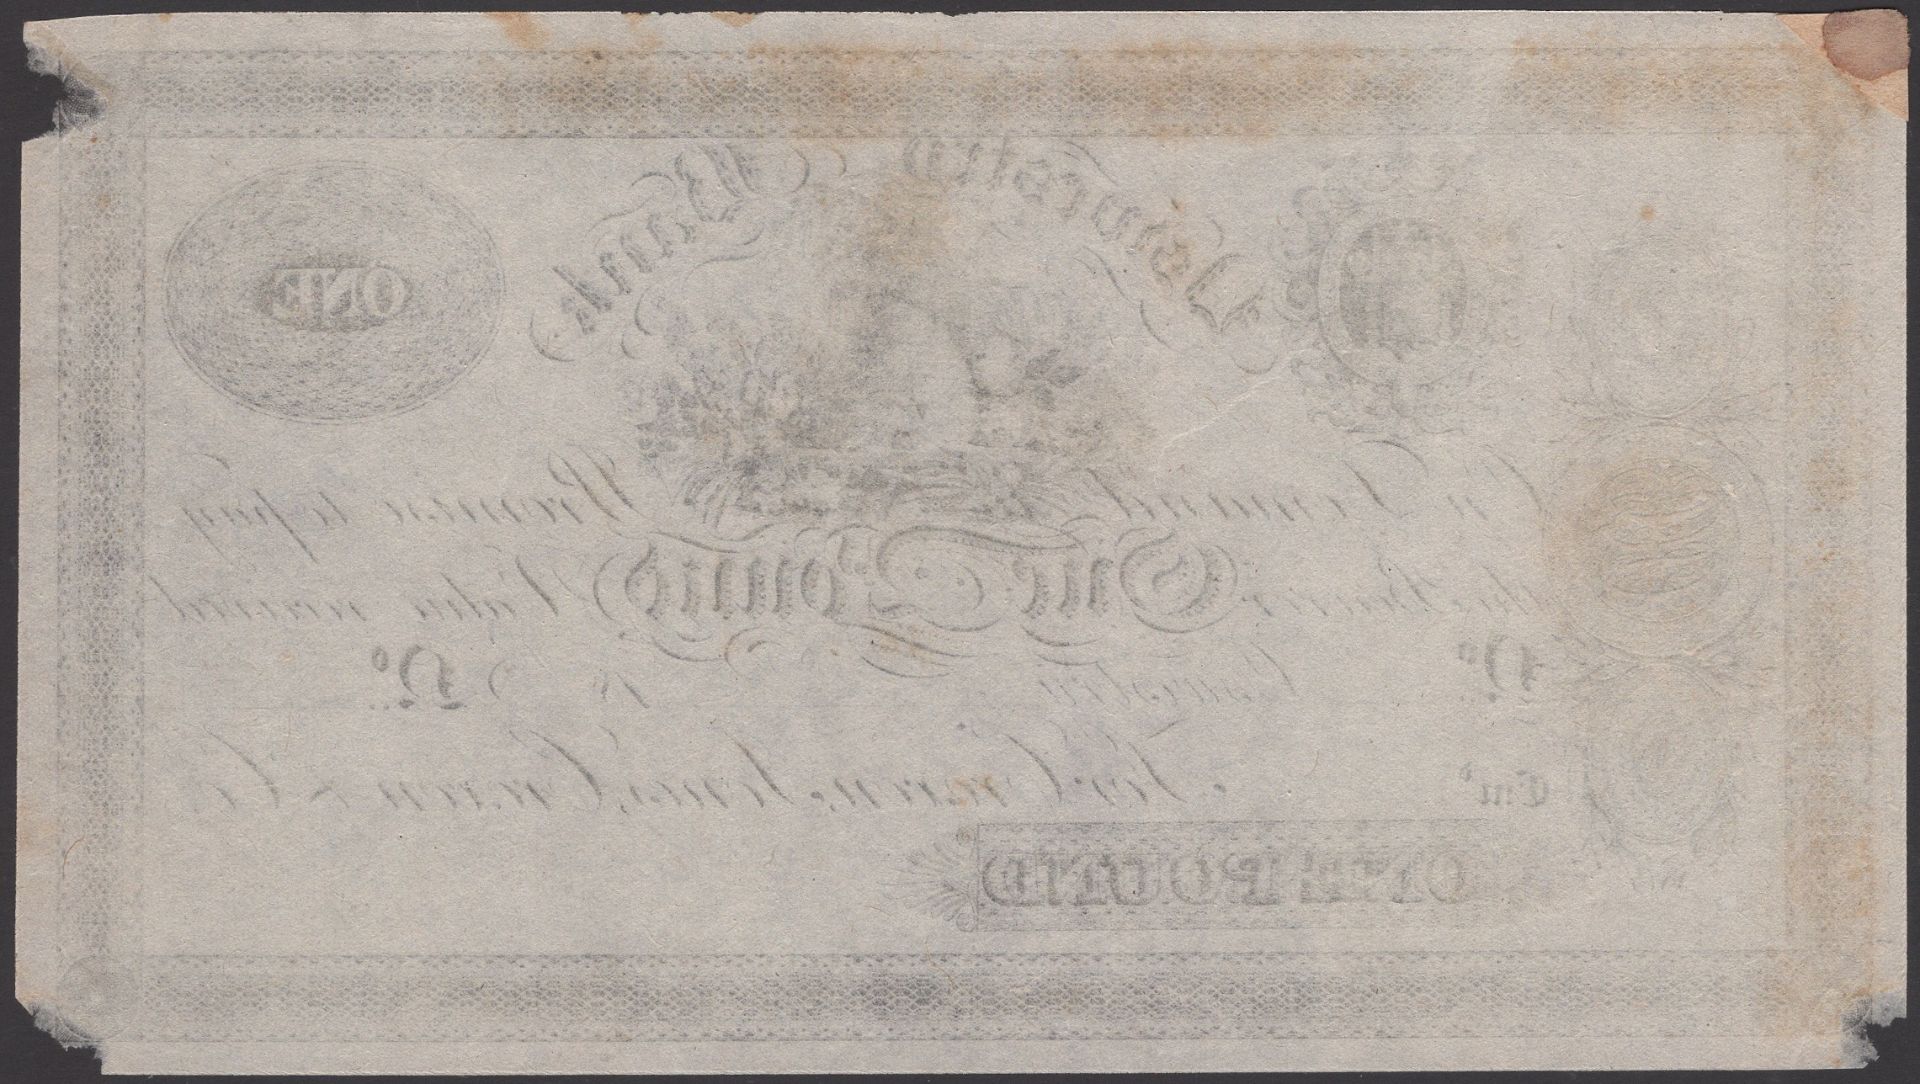 Oswestry Bank, for Croxon, Jone, Croxon & Co., proof Â£1, 18-, no signature or serial number,... - Image 2 of 2